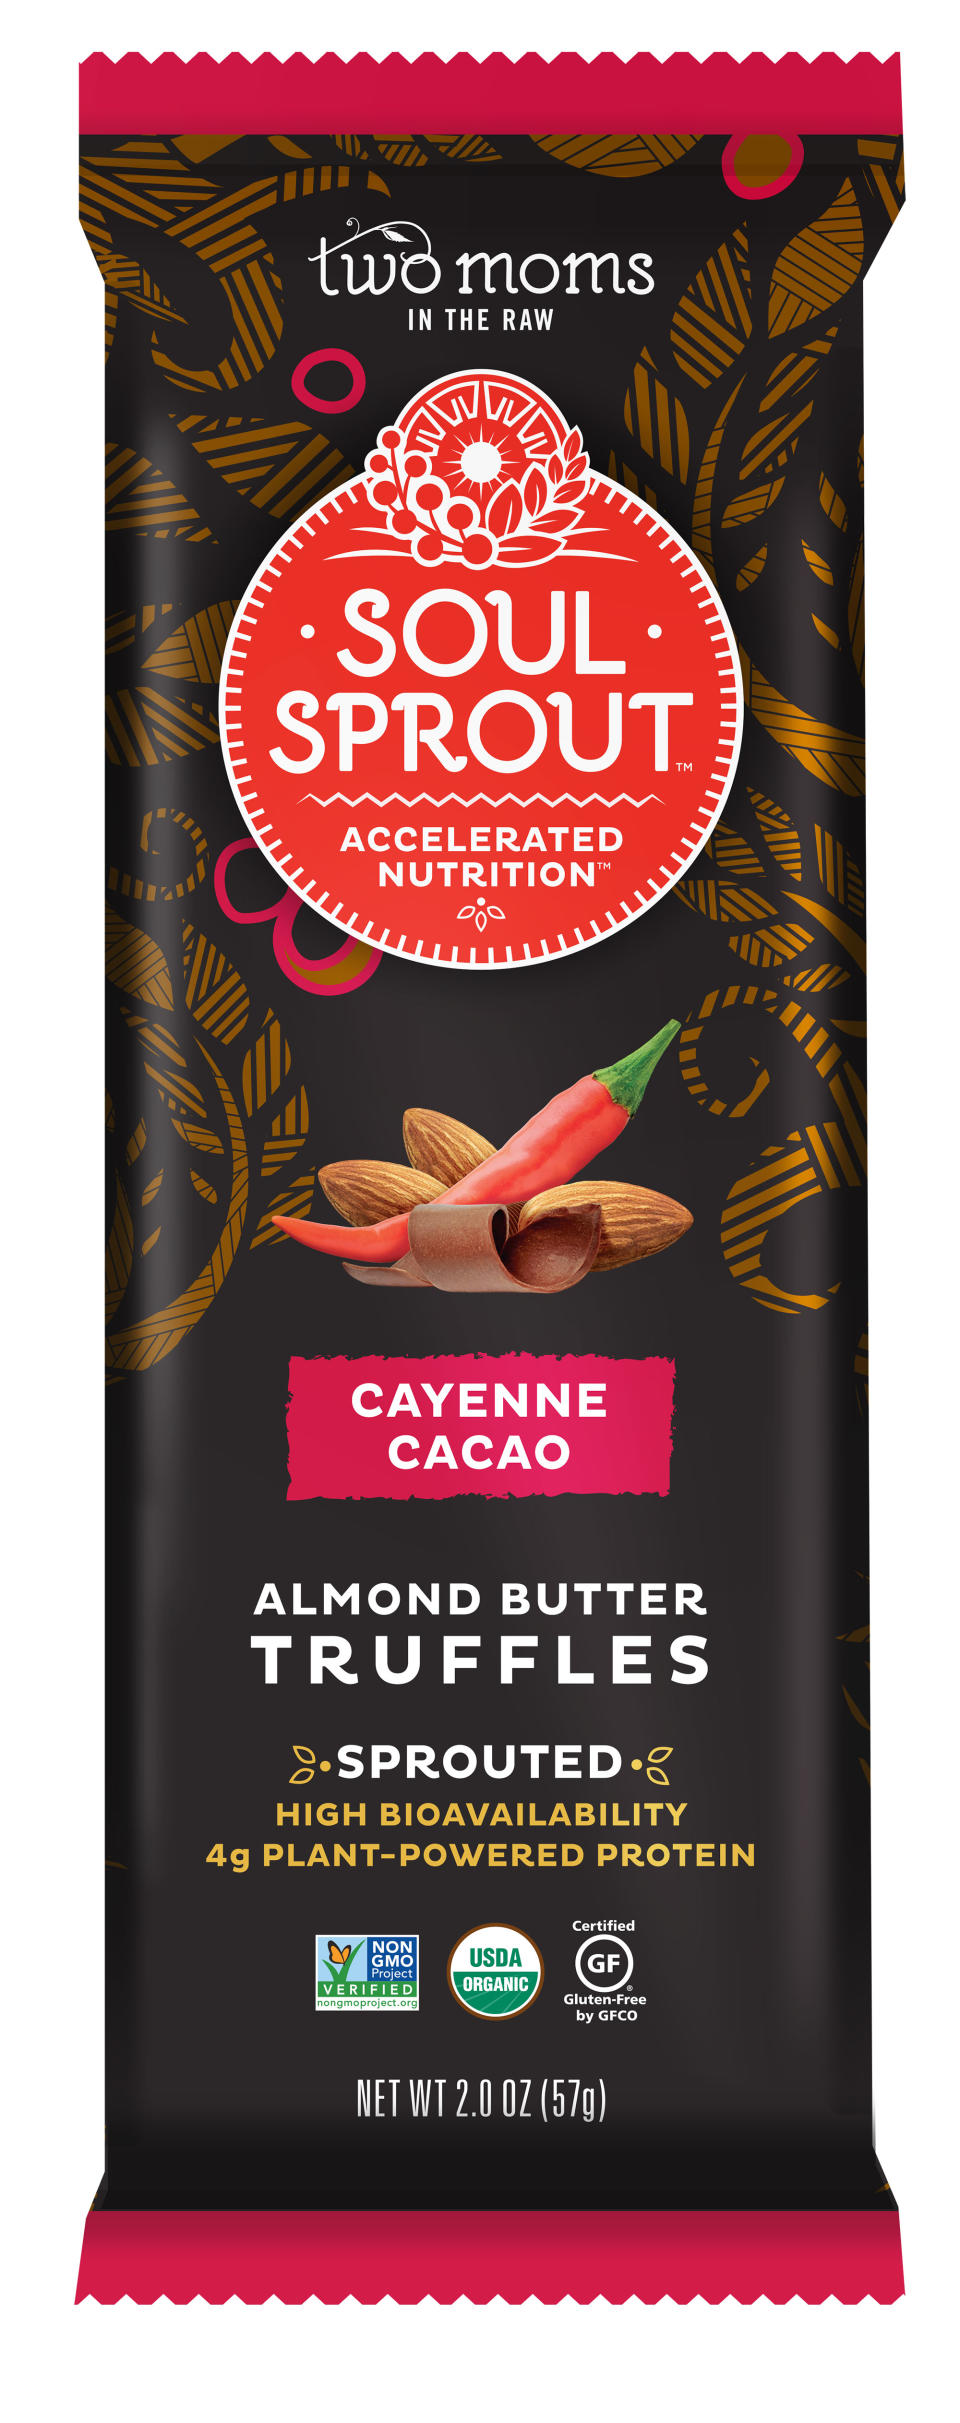 SOUL SPROUT CAYENNE CACAO ALMOND BUTTER TRUFFLES